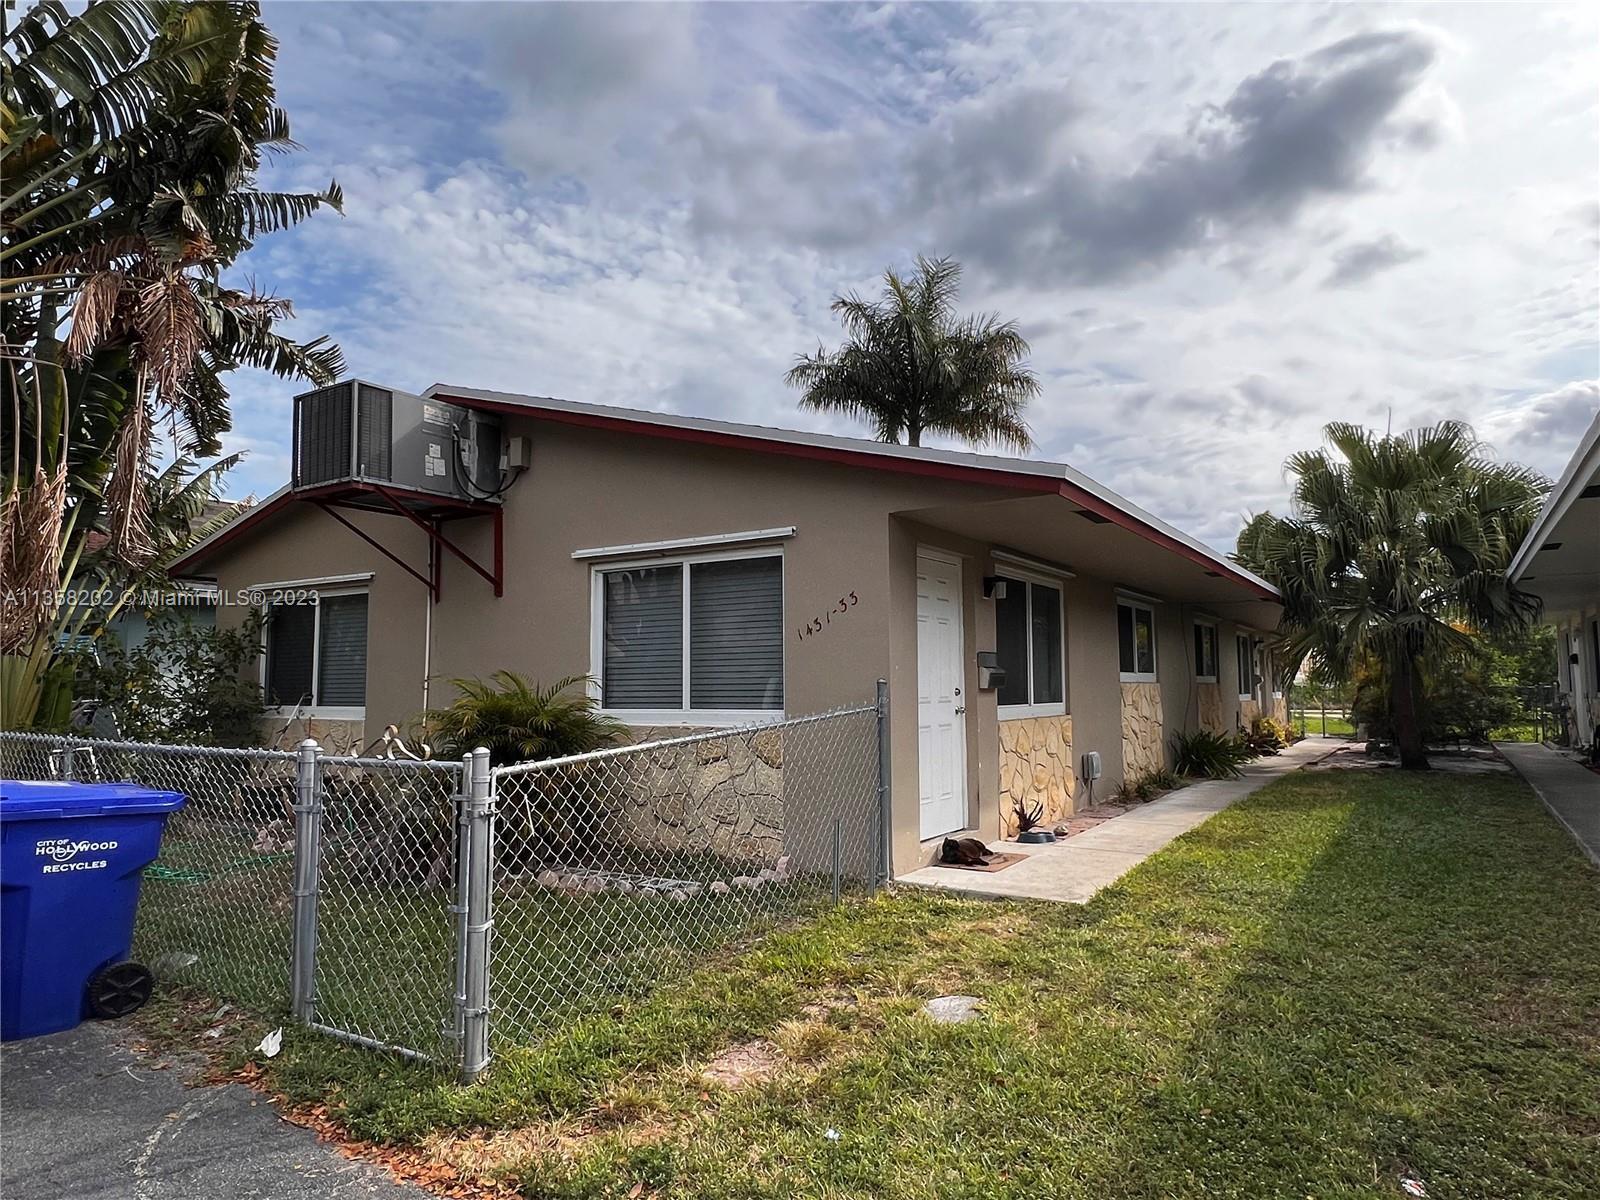 This 2 unit property is located in desirable area of East Hollywood. The physical property consists 